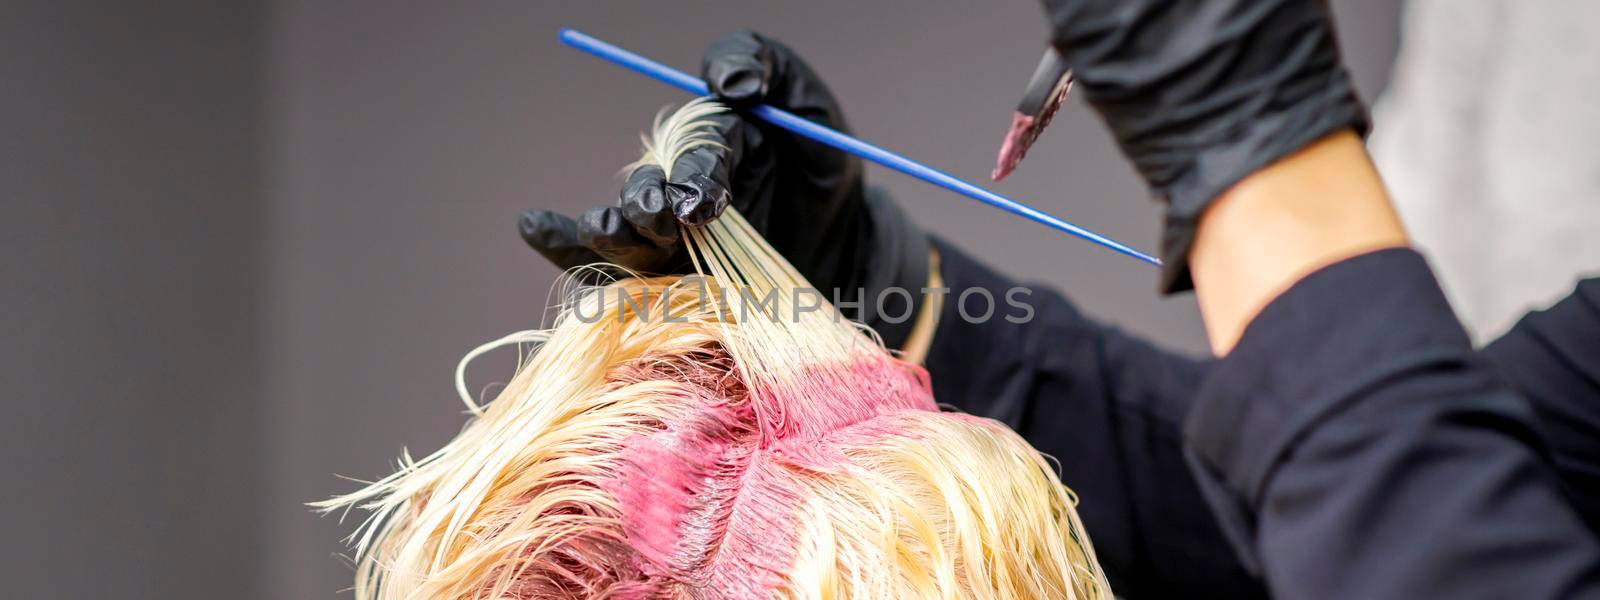 Close up of hairdresser's hands applying pink dye on woman's blonde hair at a hair salon